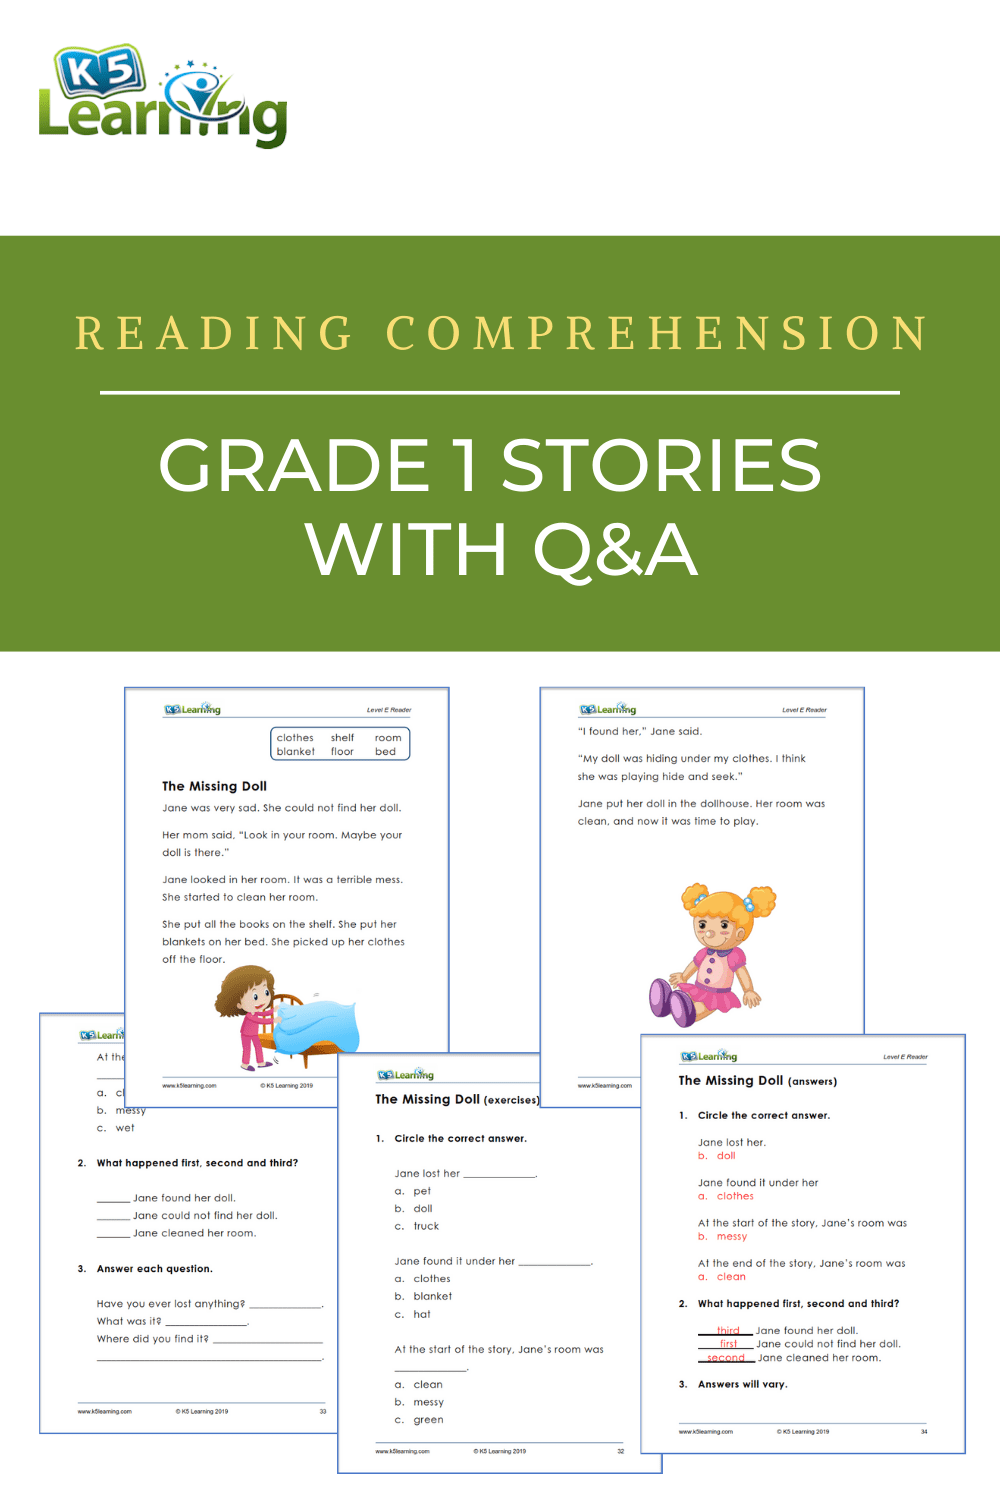 K5 Learning publishes new reading comprehension workbooks for grade 1 ...